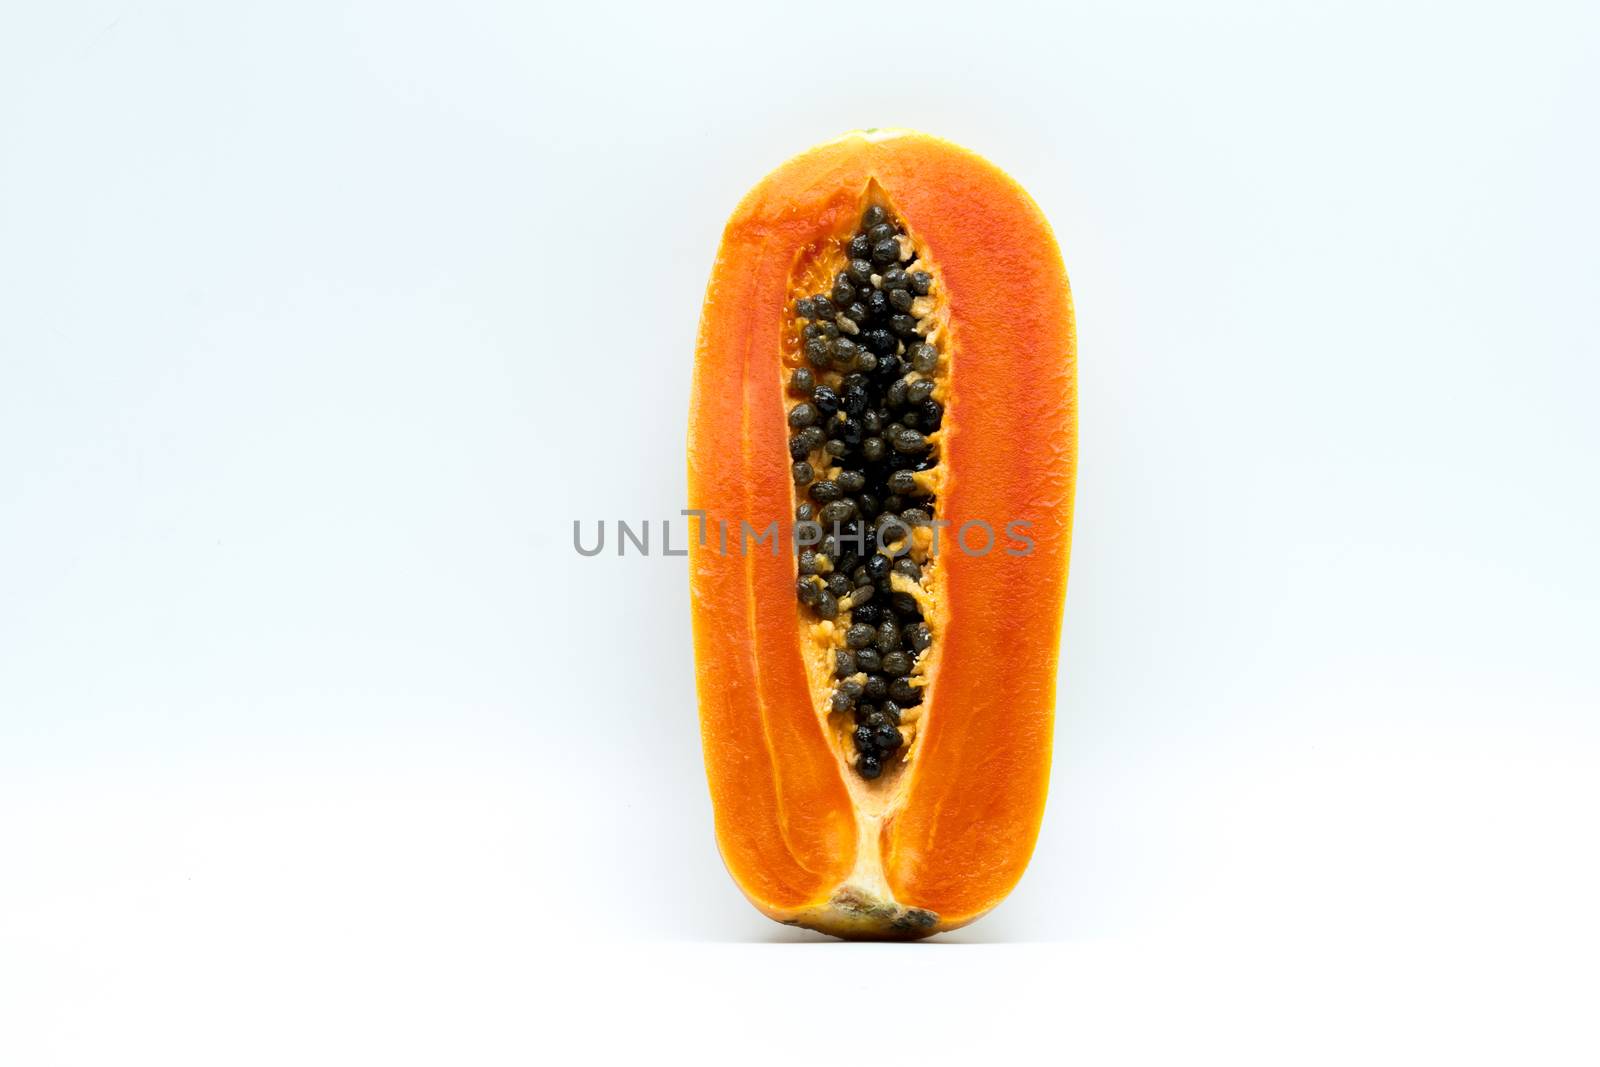 Half of ripe papaya fruit with seeds isolated on white background with copy space. Natural source of vitamin C, folate and minerals. Healthy food for pregnant and breast feeding woman by Fahroni